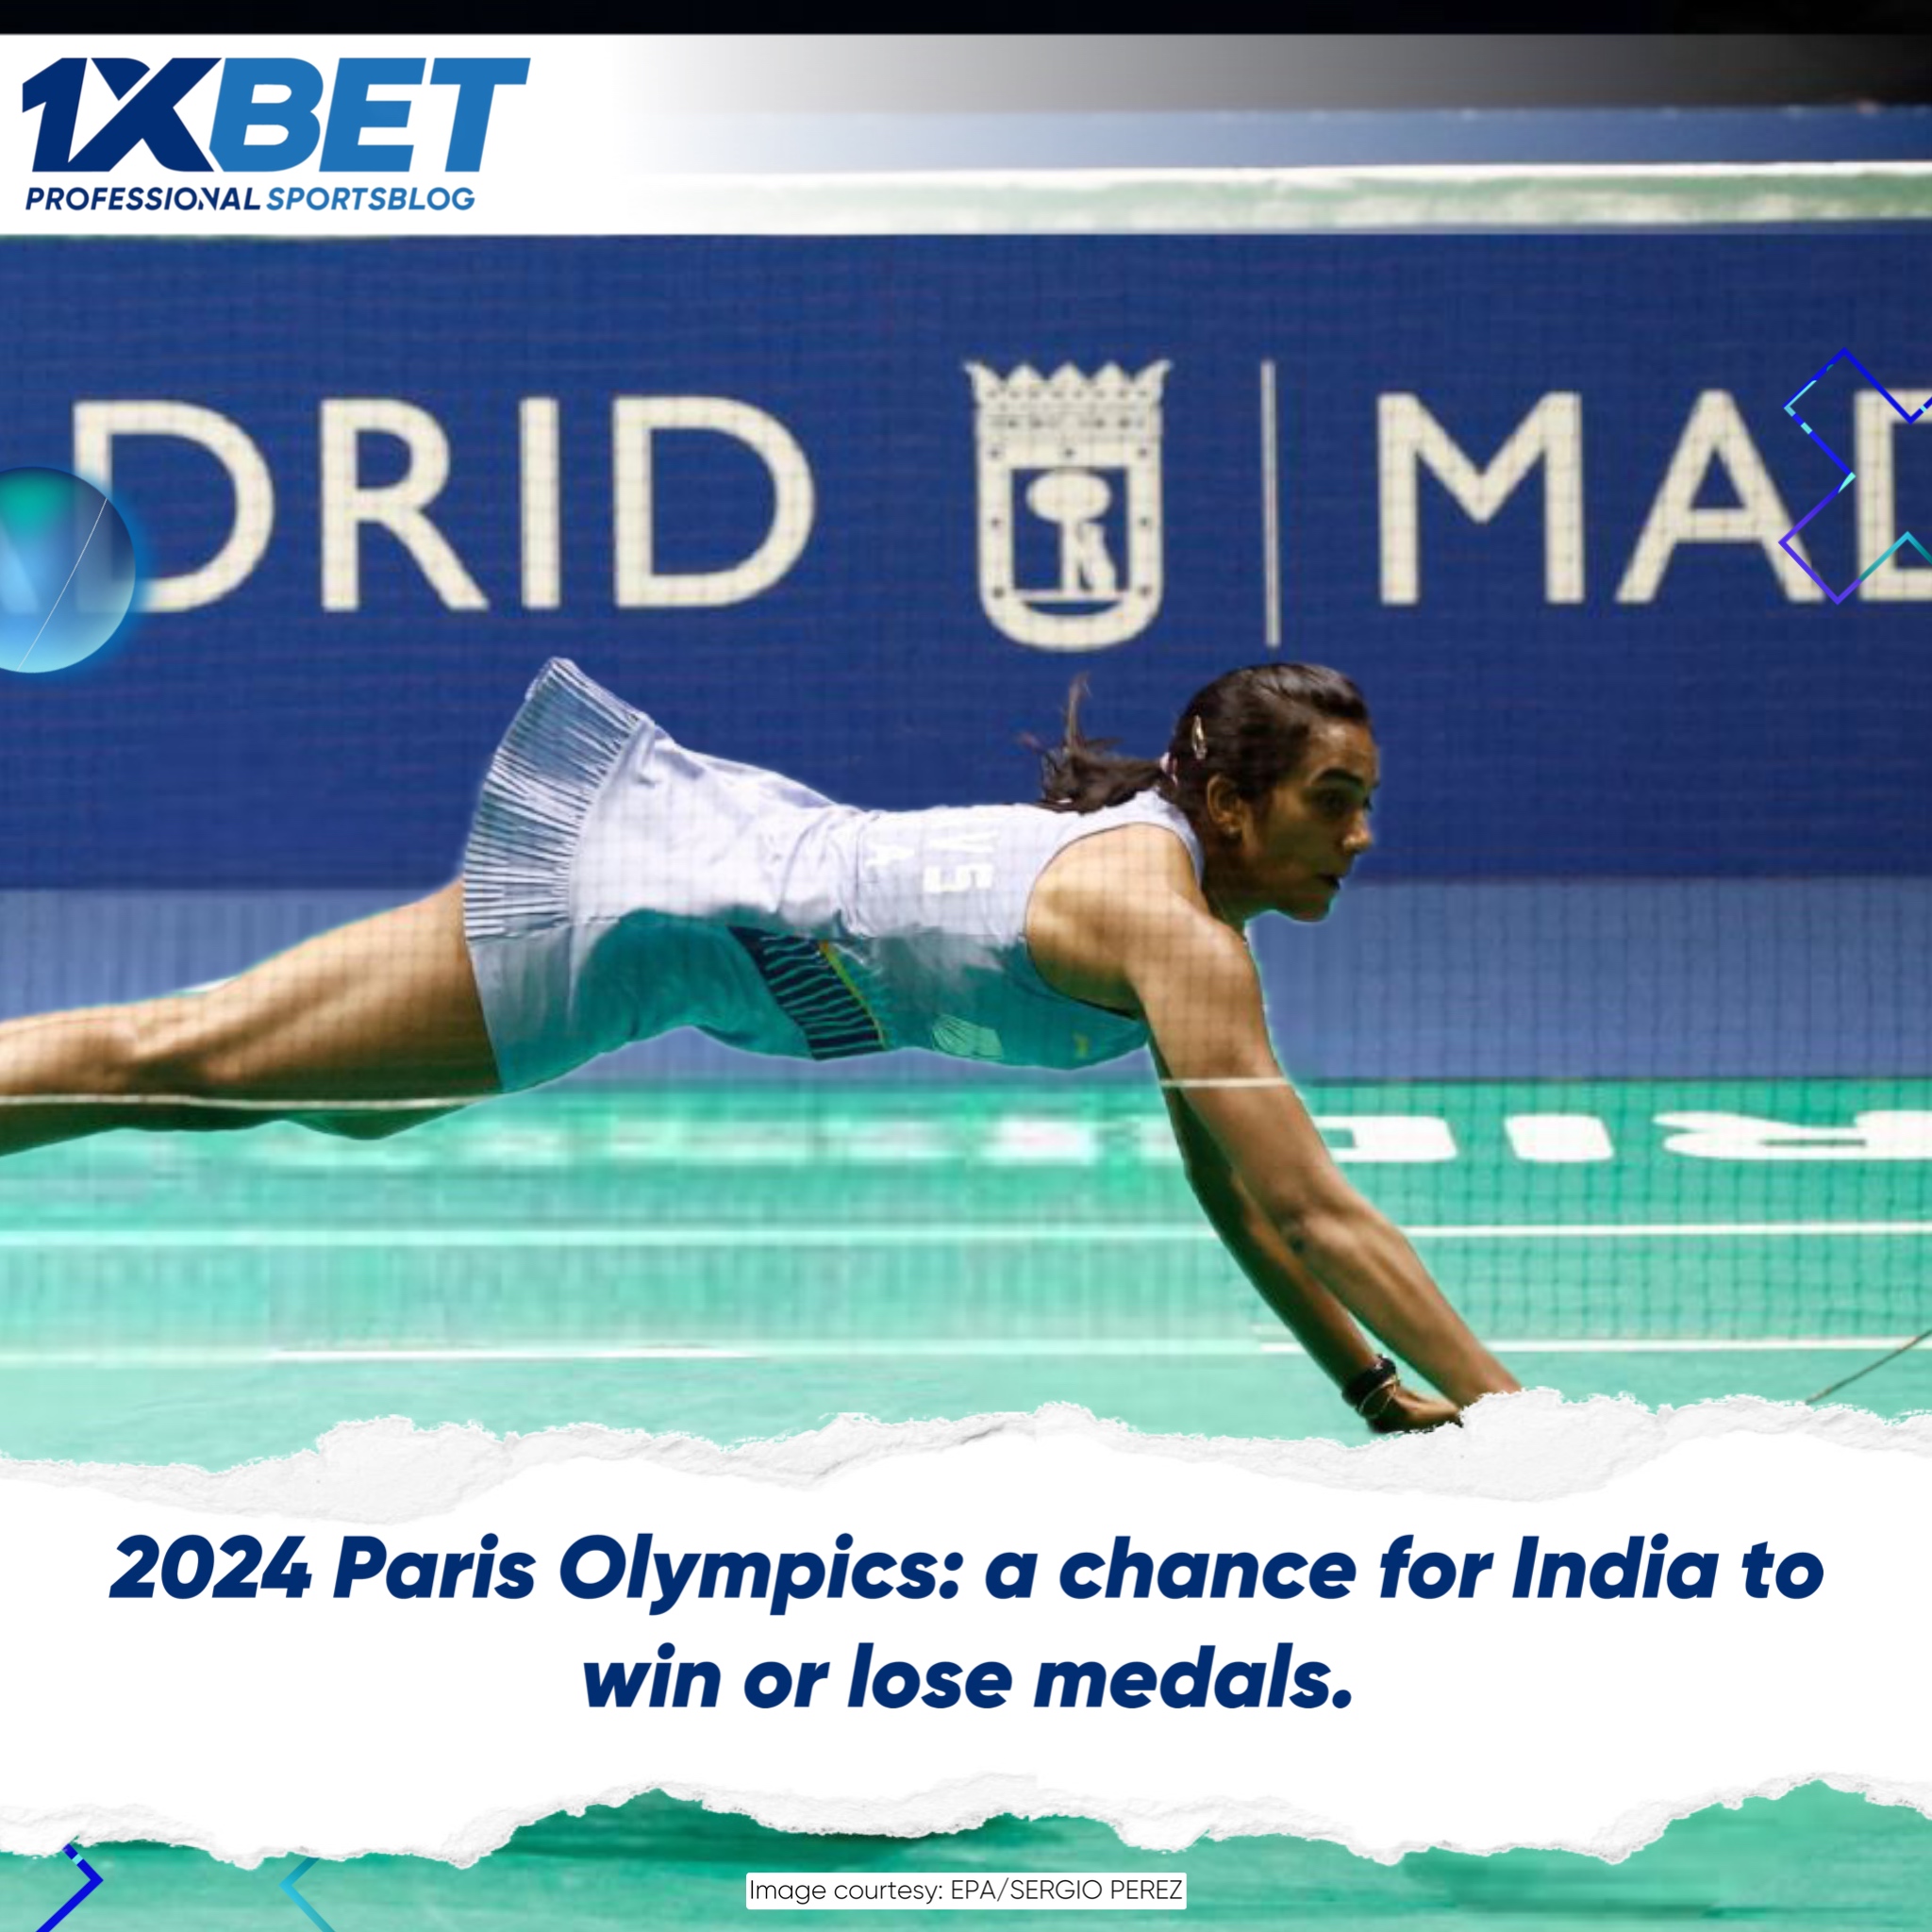 Top Indian Medal Contenders for Paris Olympics: A Closer Look